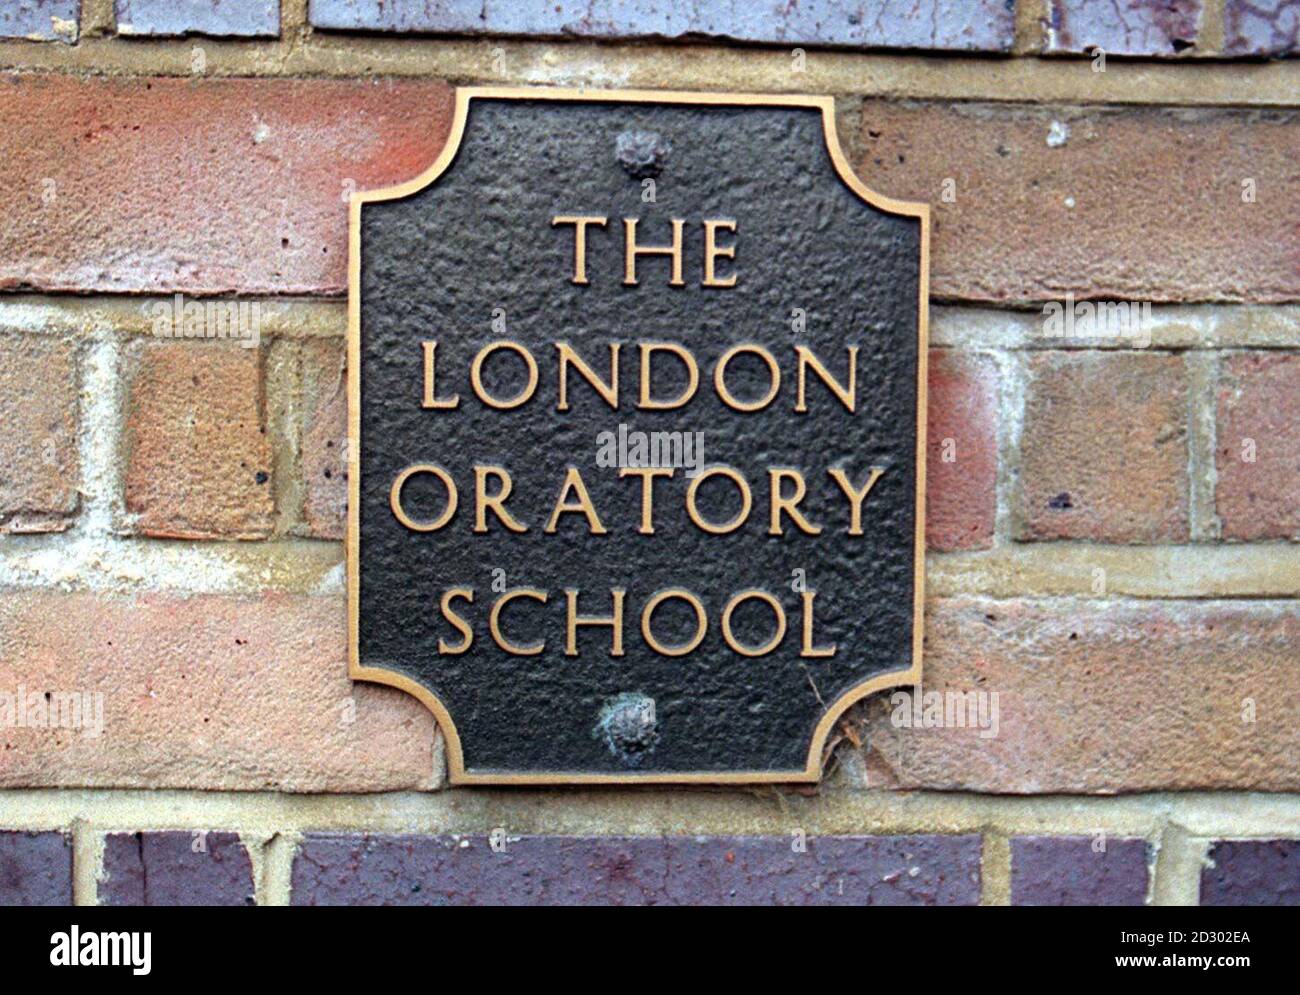 The London Oratory school. Dario Iacoponi, 15, who was found dead in a room at his family's home in west London, was a pupil at the school, along with Tony Blair's sons Euan, 14, and Nicky, 12. The brilliant schoolboy had shot himself. * after months of meticulously planning his own death, an inquest heard. 5/12/00: an investigation has been launched into allegations of child abuse. The probe centres on a former chaplain and governor at the school in Fulham, south-west London, who died of a suspected Aids-related illness, the Daily Mail reported. Police and social services acted after pup Stock Photo